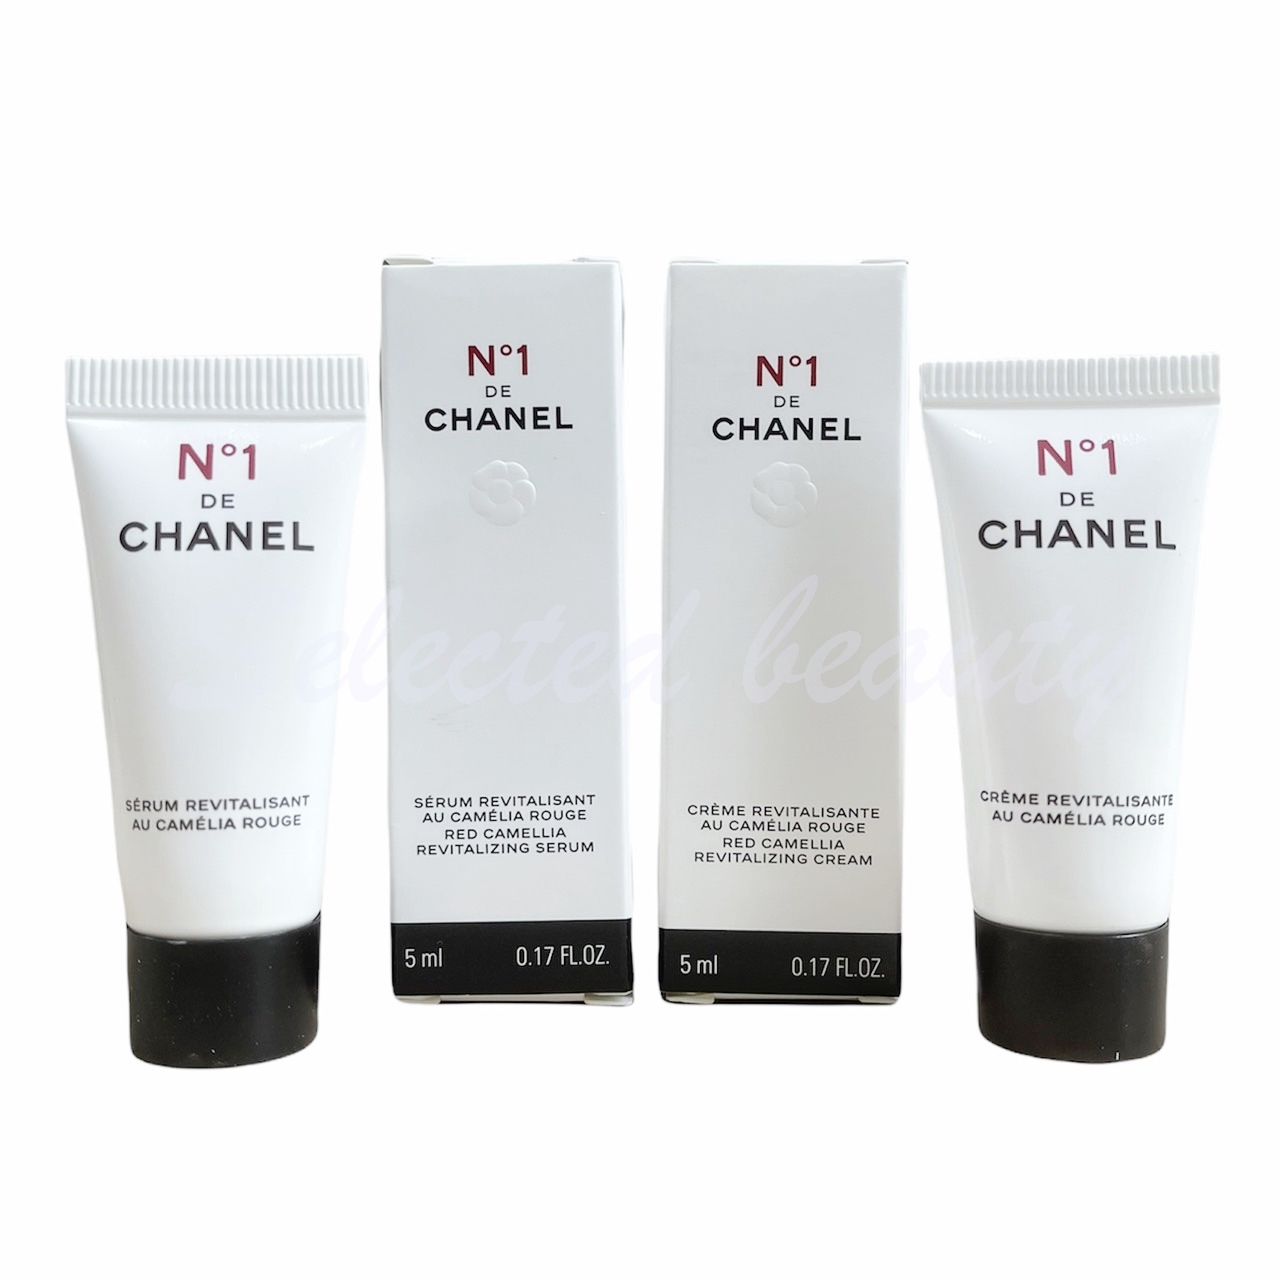 N1 DE CHANEL REVITALIZING SERUMPREVENTS AND CORRECTS THE APPEARANCE OF THE  5 SIGNS OF AGING  CHANEL eshop  CHANEL ESHOP